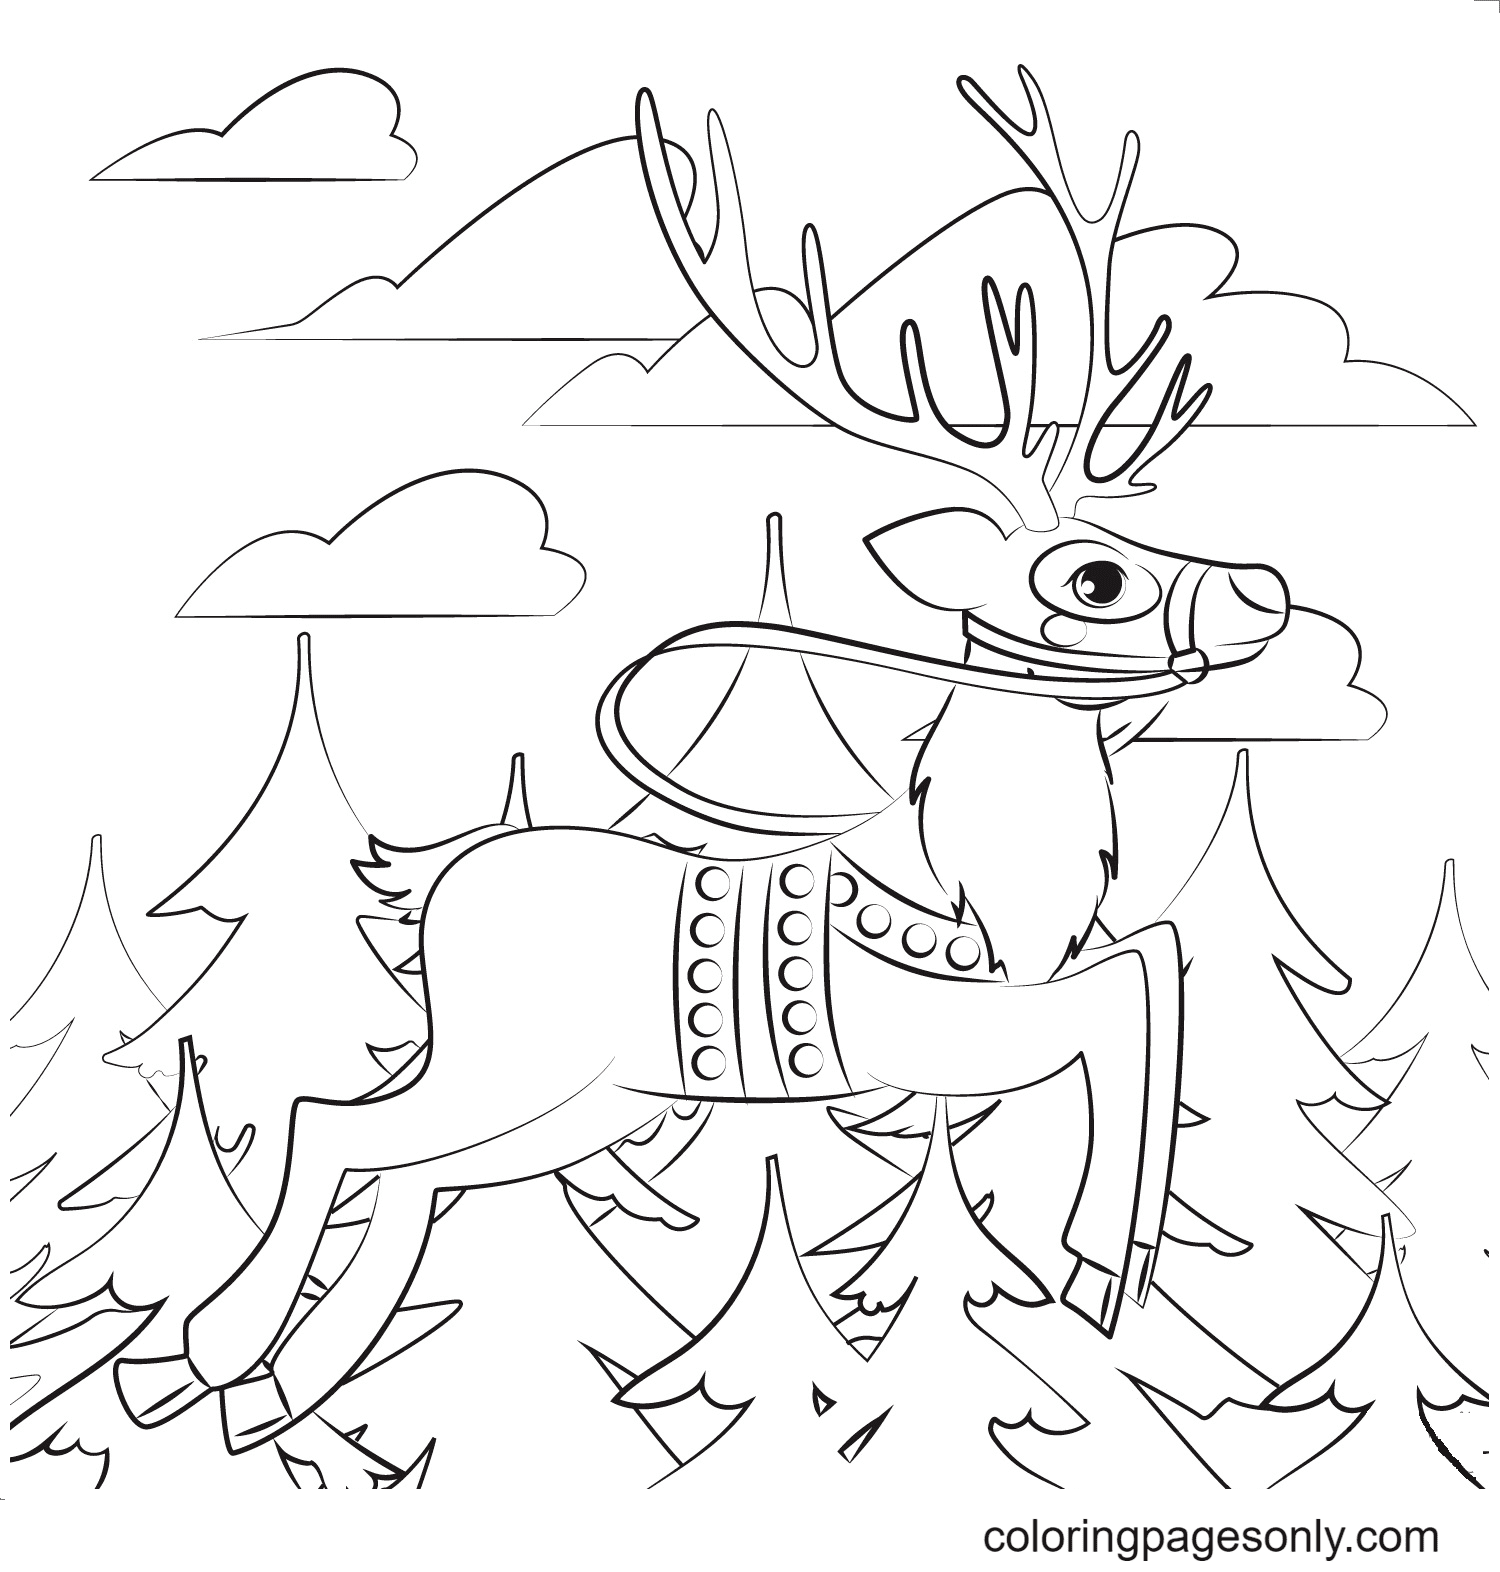 Reindeer Walking Through The Pine Forest Coloring Pages